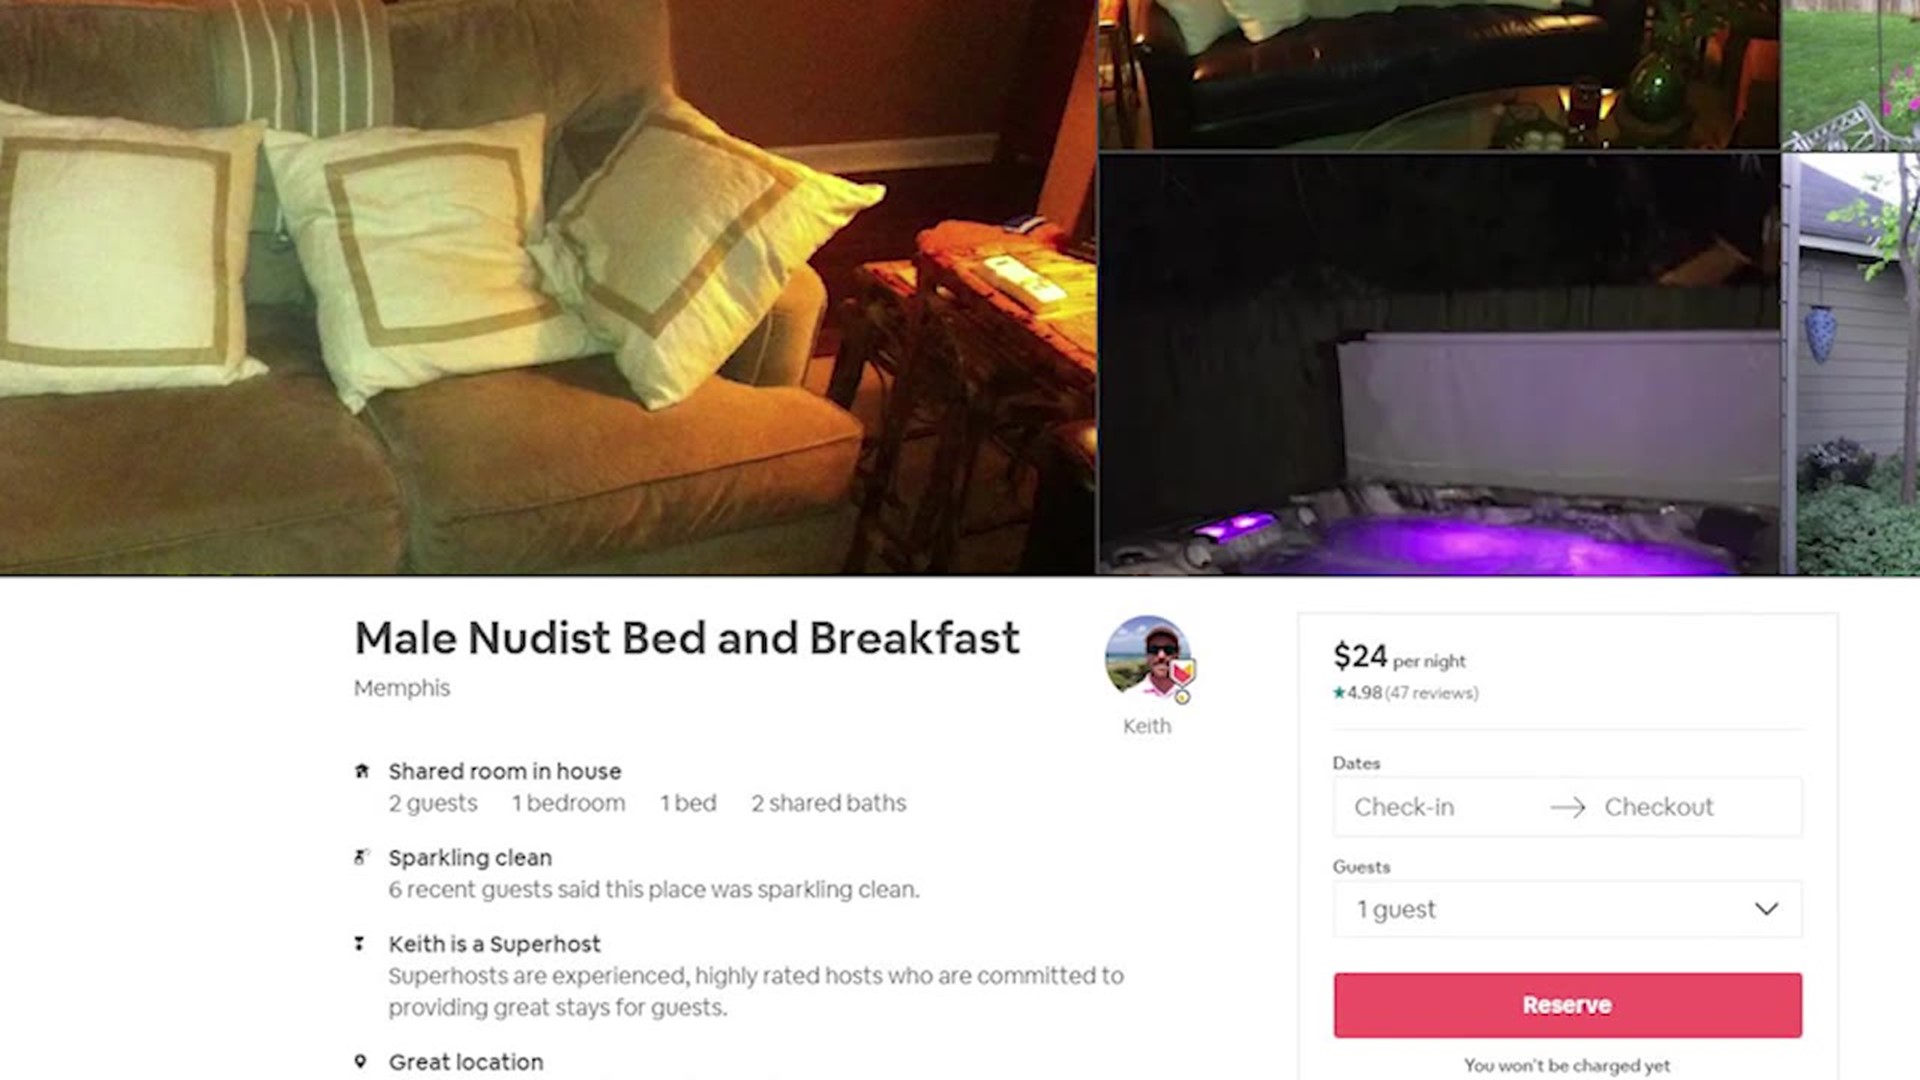 Letting it all hang out: A Mid-South nudist AirBnB